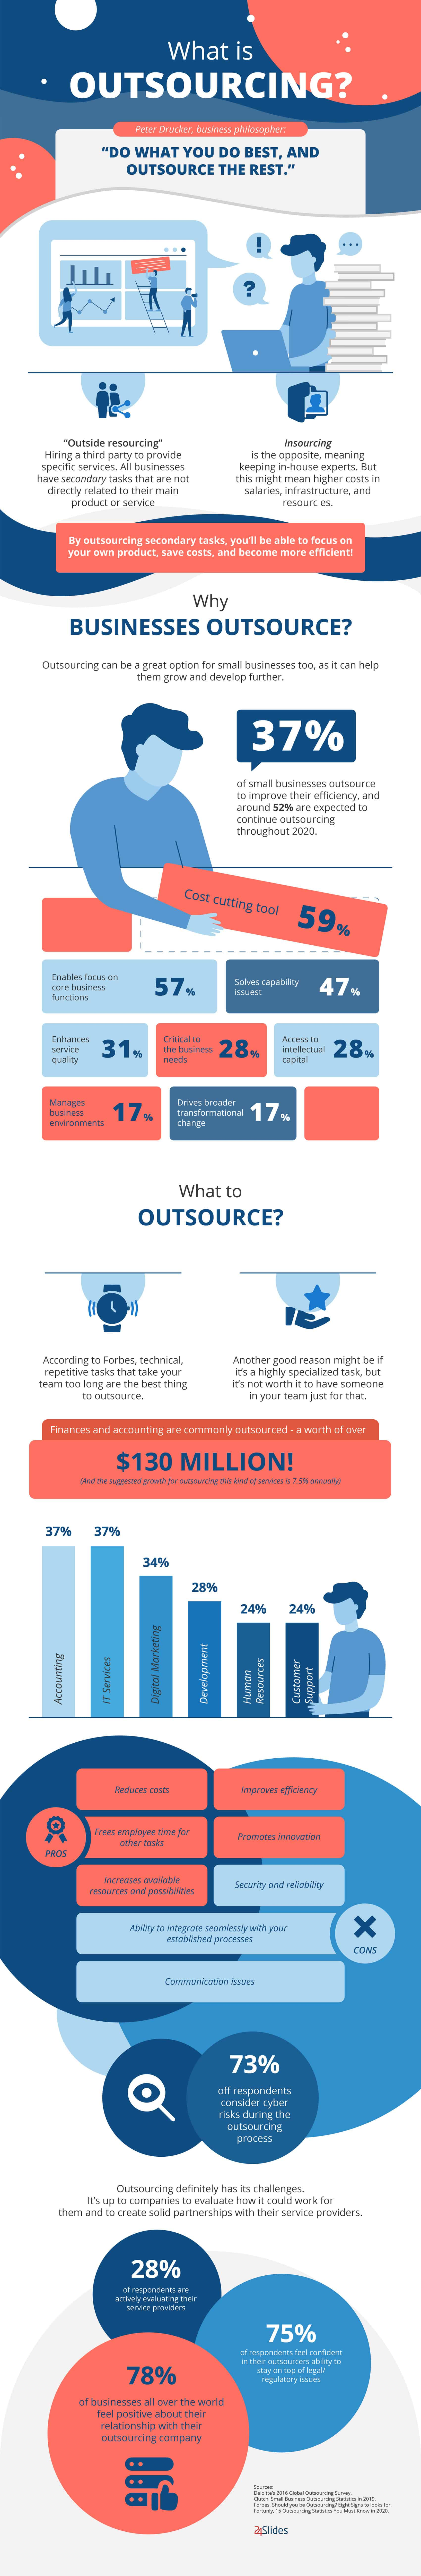 what is outsourcing infographic